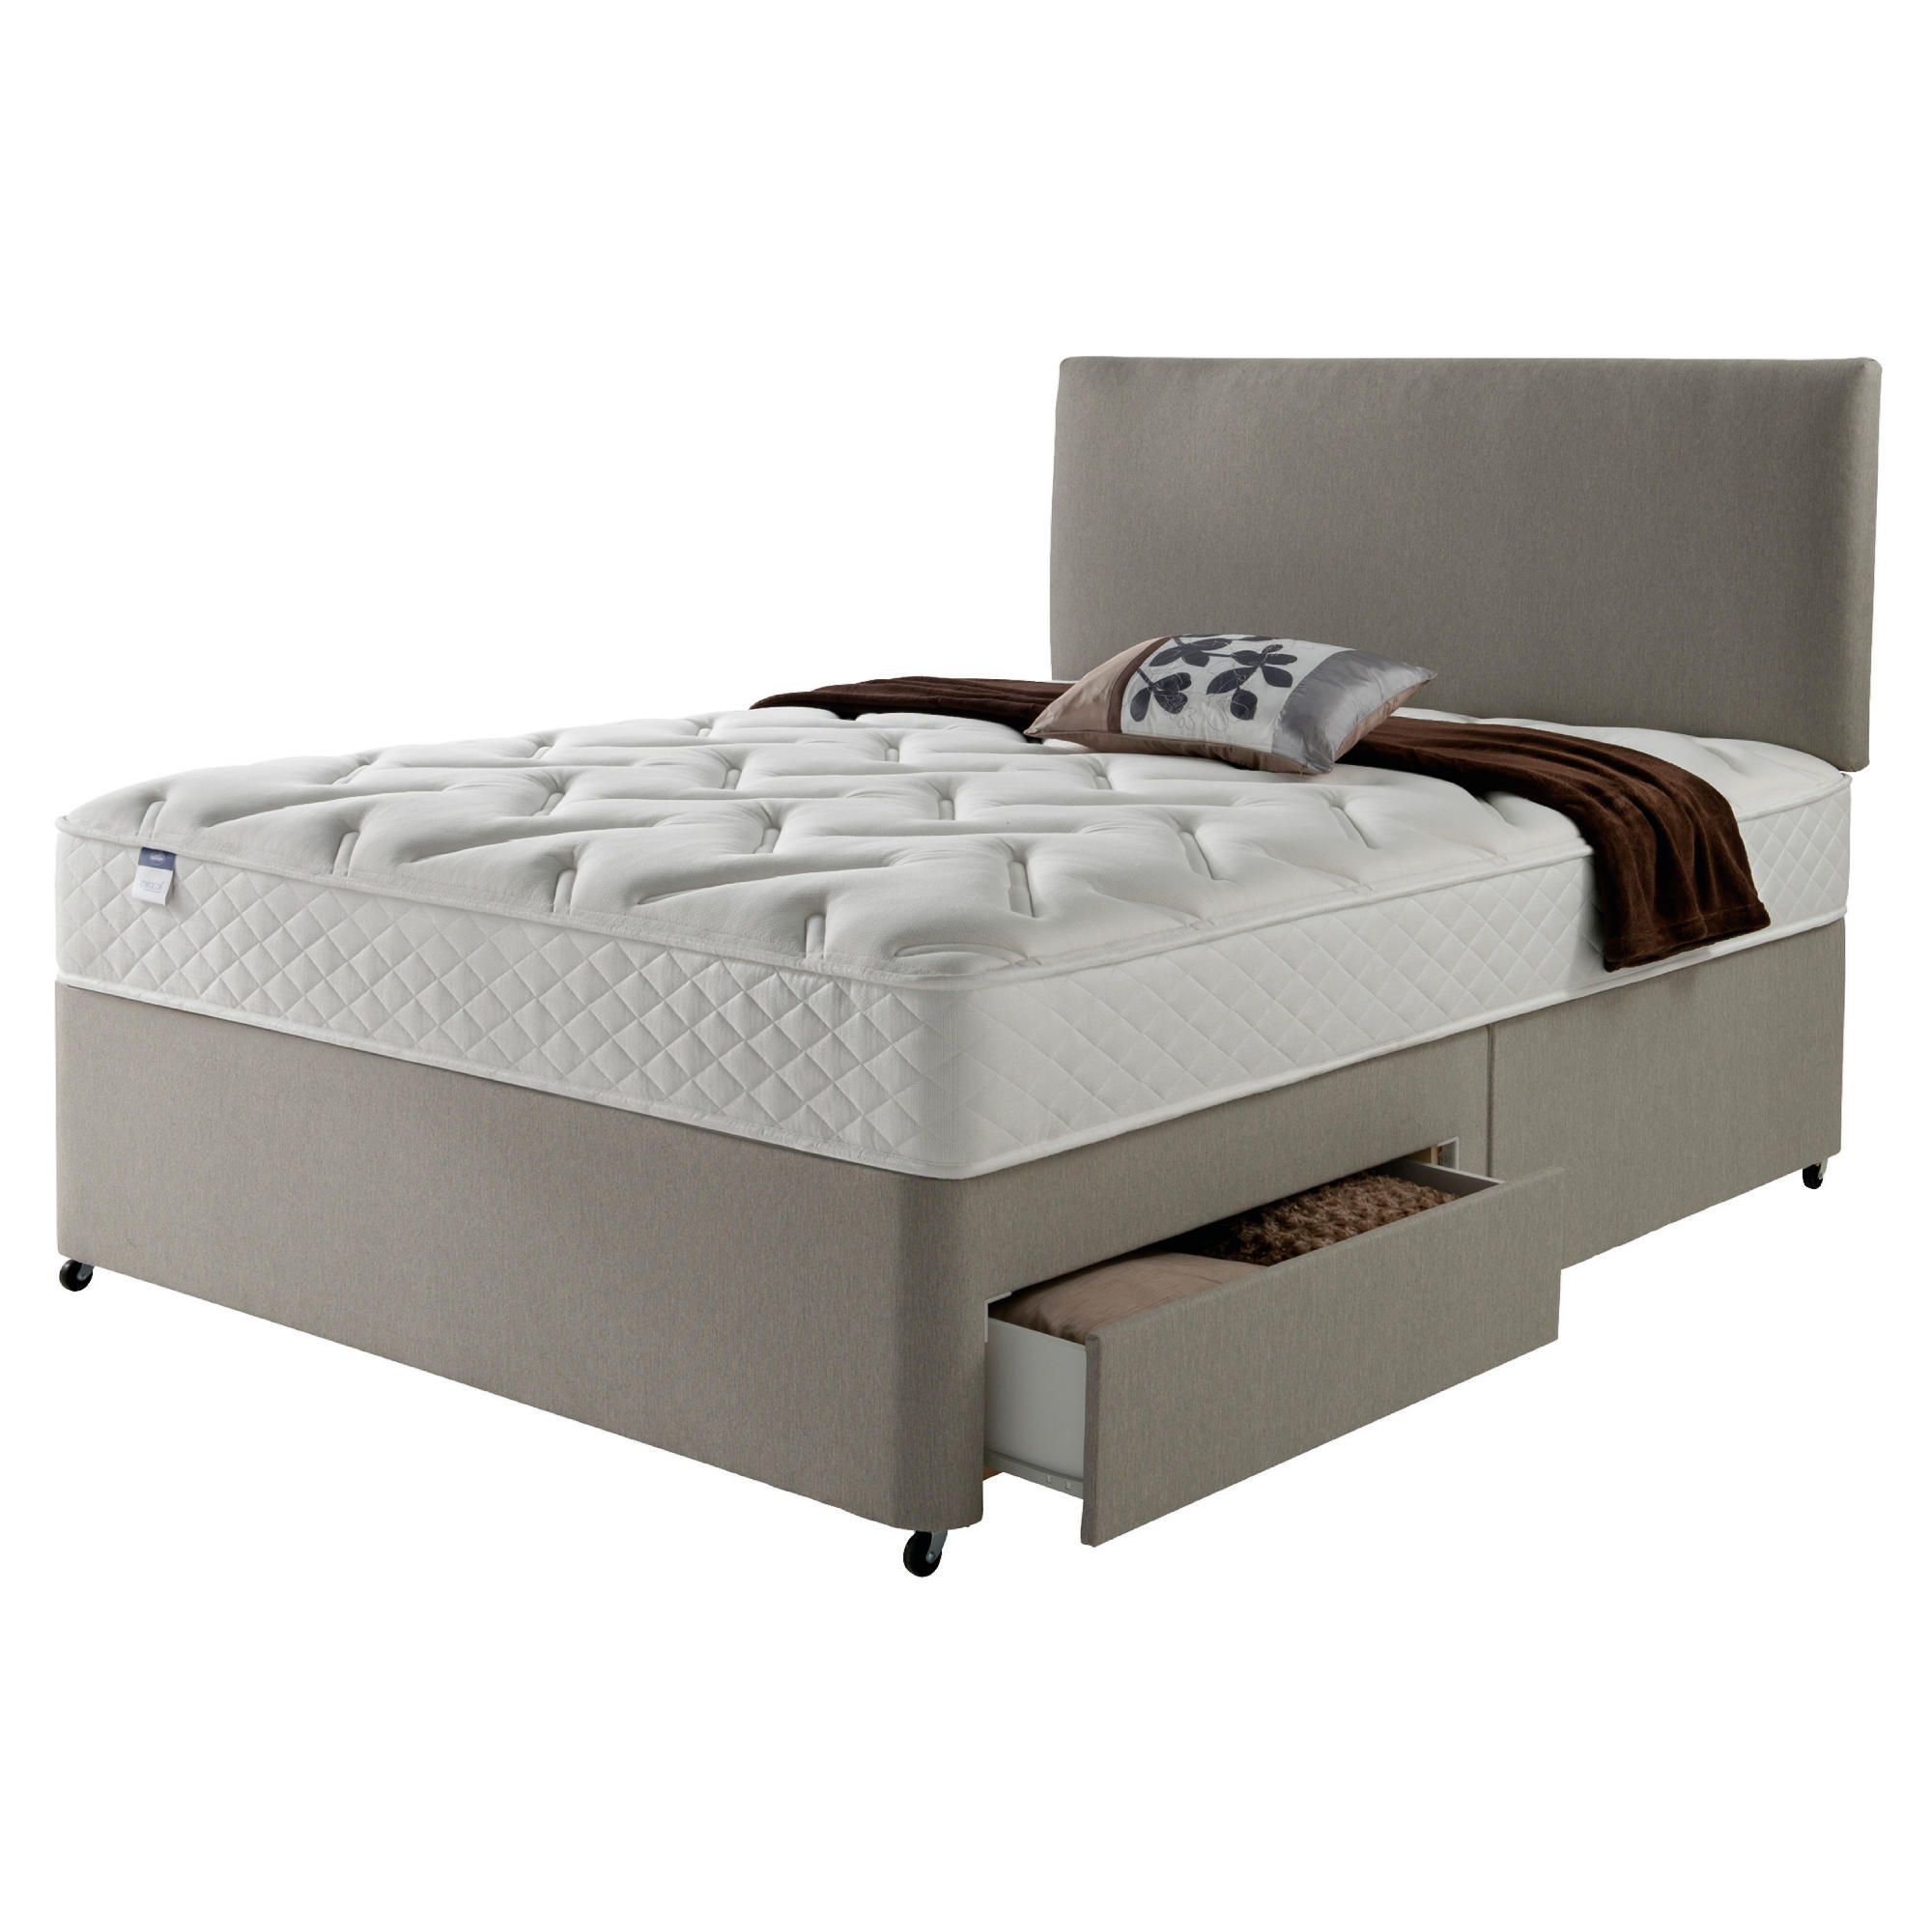 Silentnight Miracoil Luxury Memory 2 Drawer Super King Divan Mink with Headboard at Tesco Direct